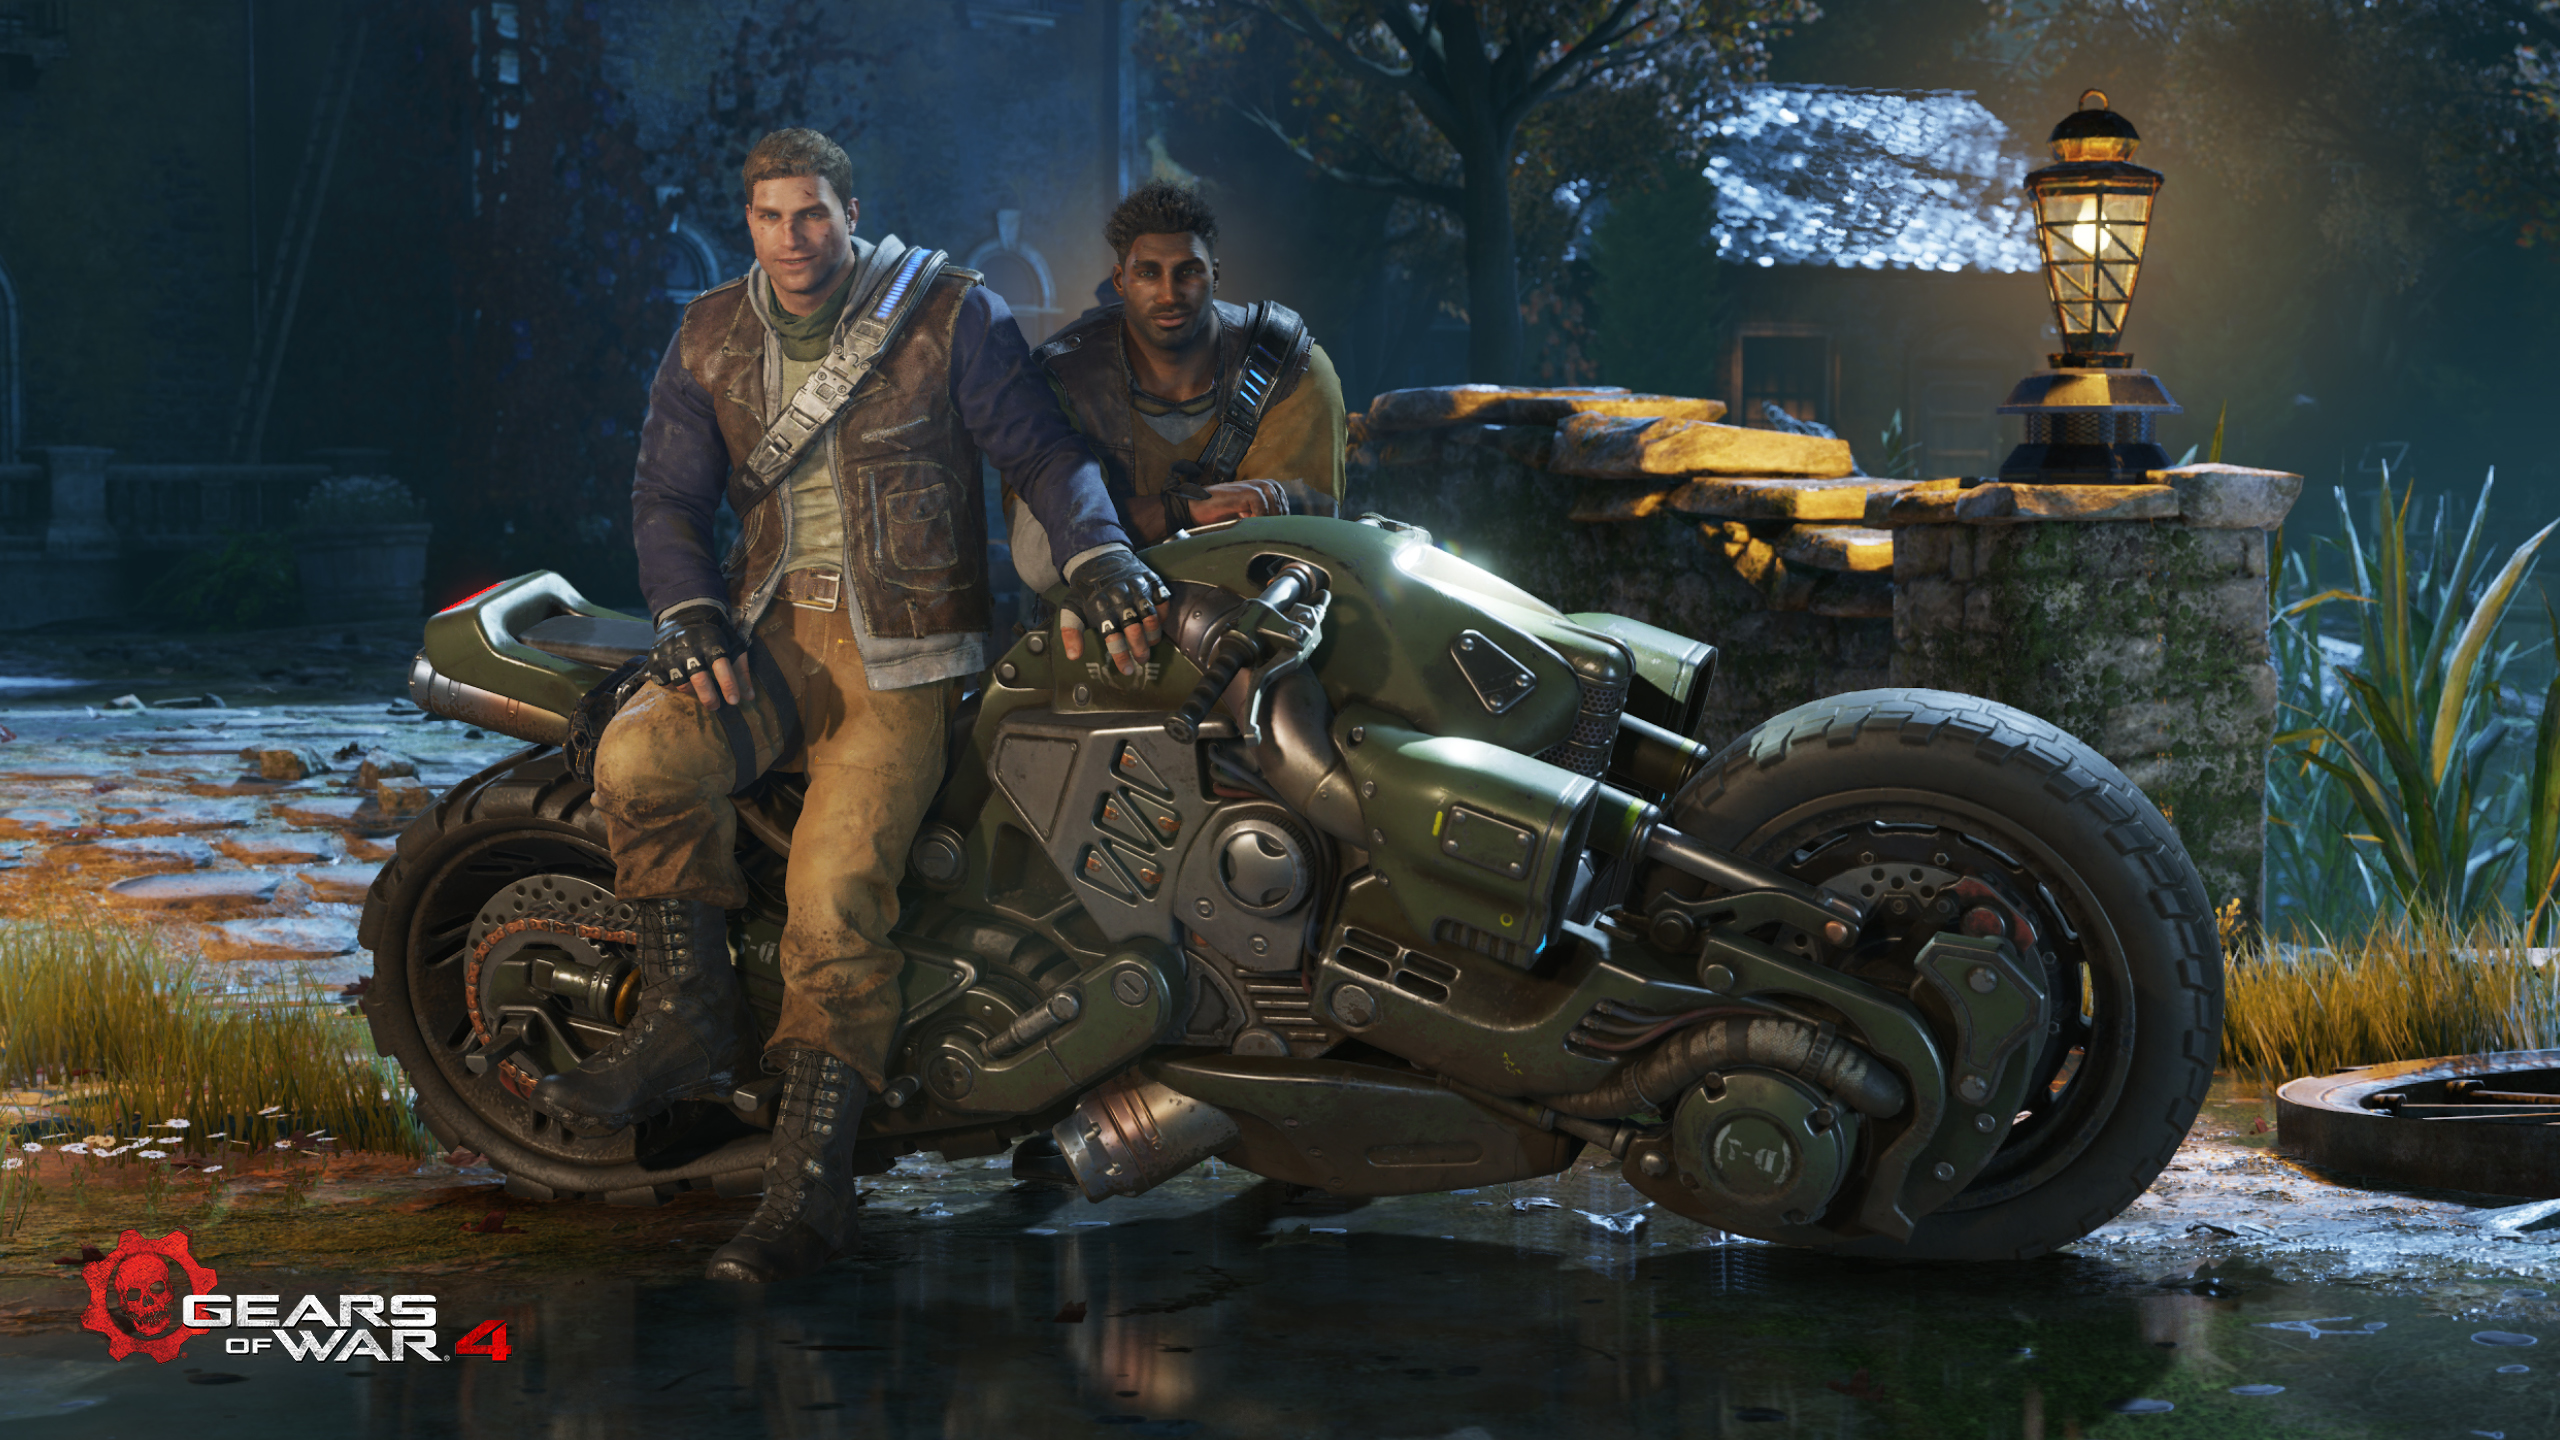 Gears Of War 4 2016 Game, HD Games, 4k Wallpapers, Images, Backgrounds